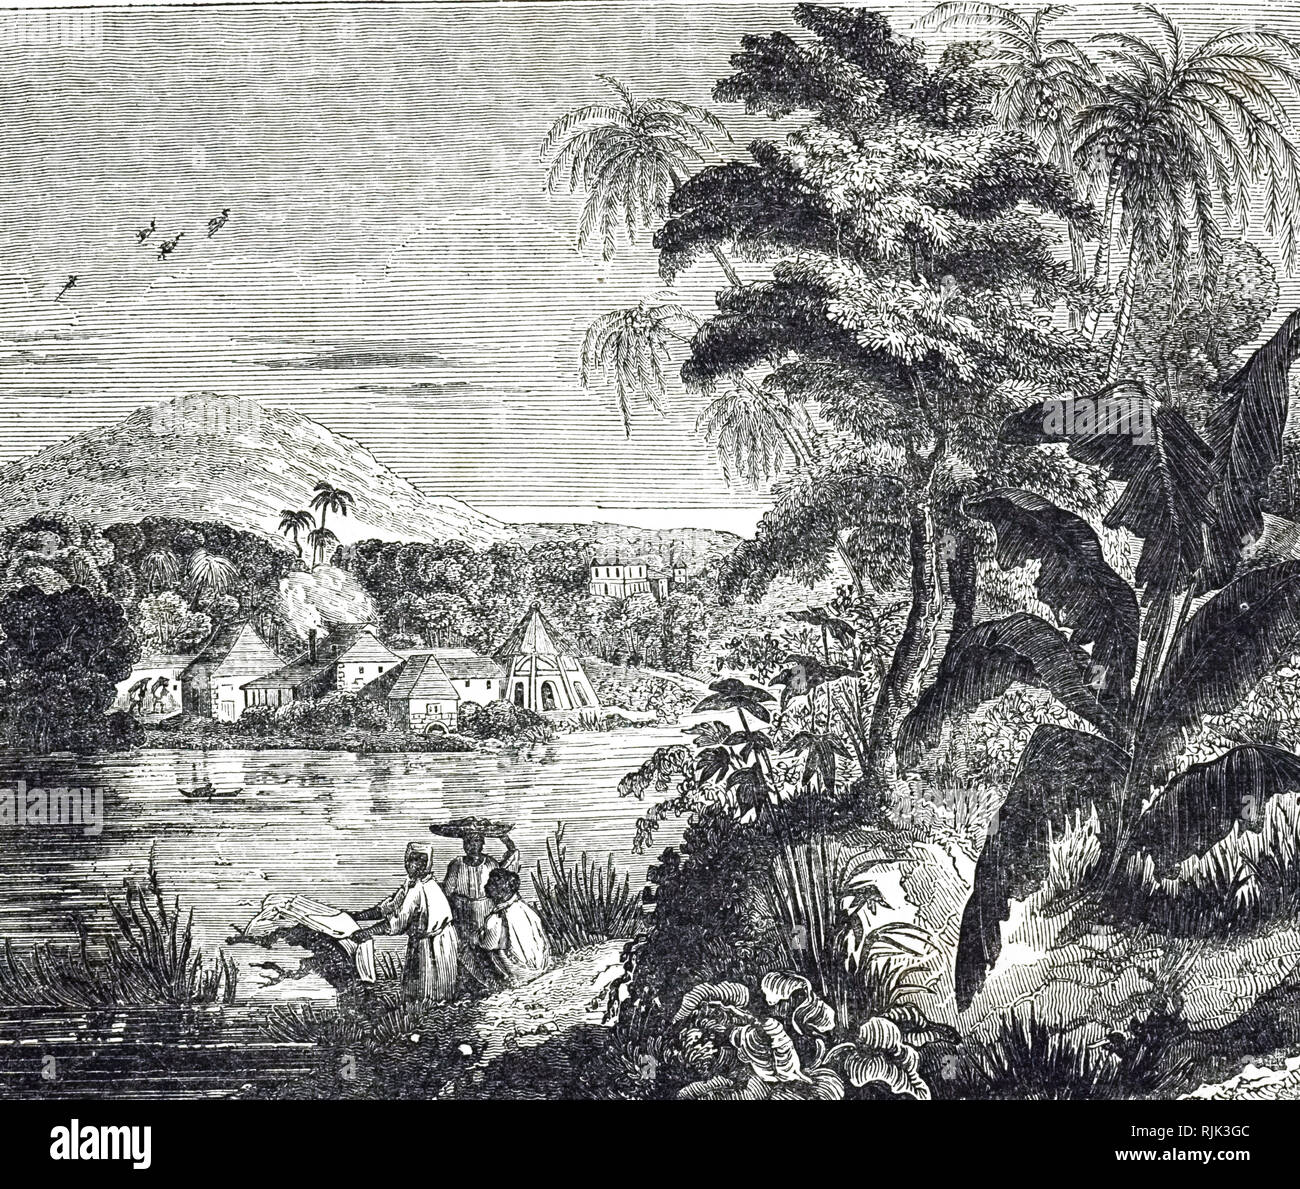 An engraving depicting a Jamaican sugarcane plantation during the sugar boom. African slaves harvested the sugar cane for their British owners. Dated 19th century Stock Photo